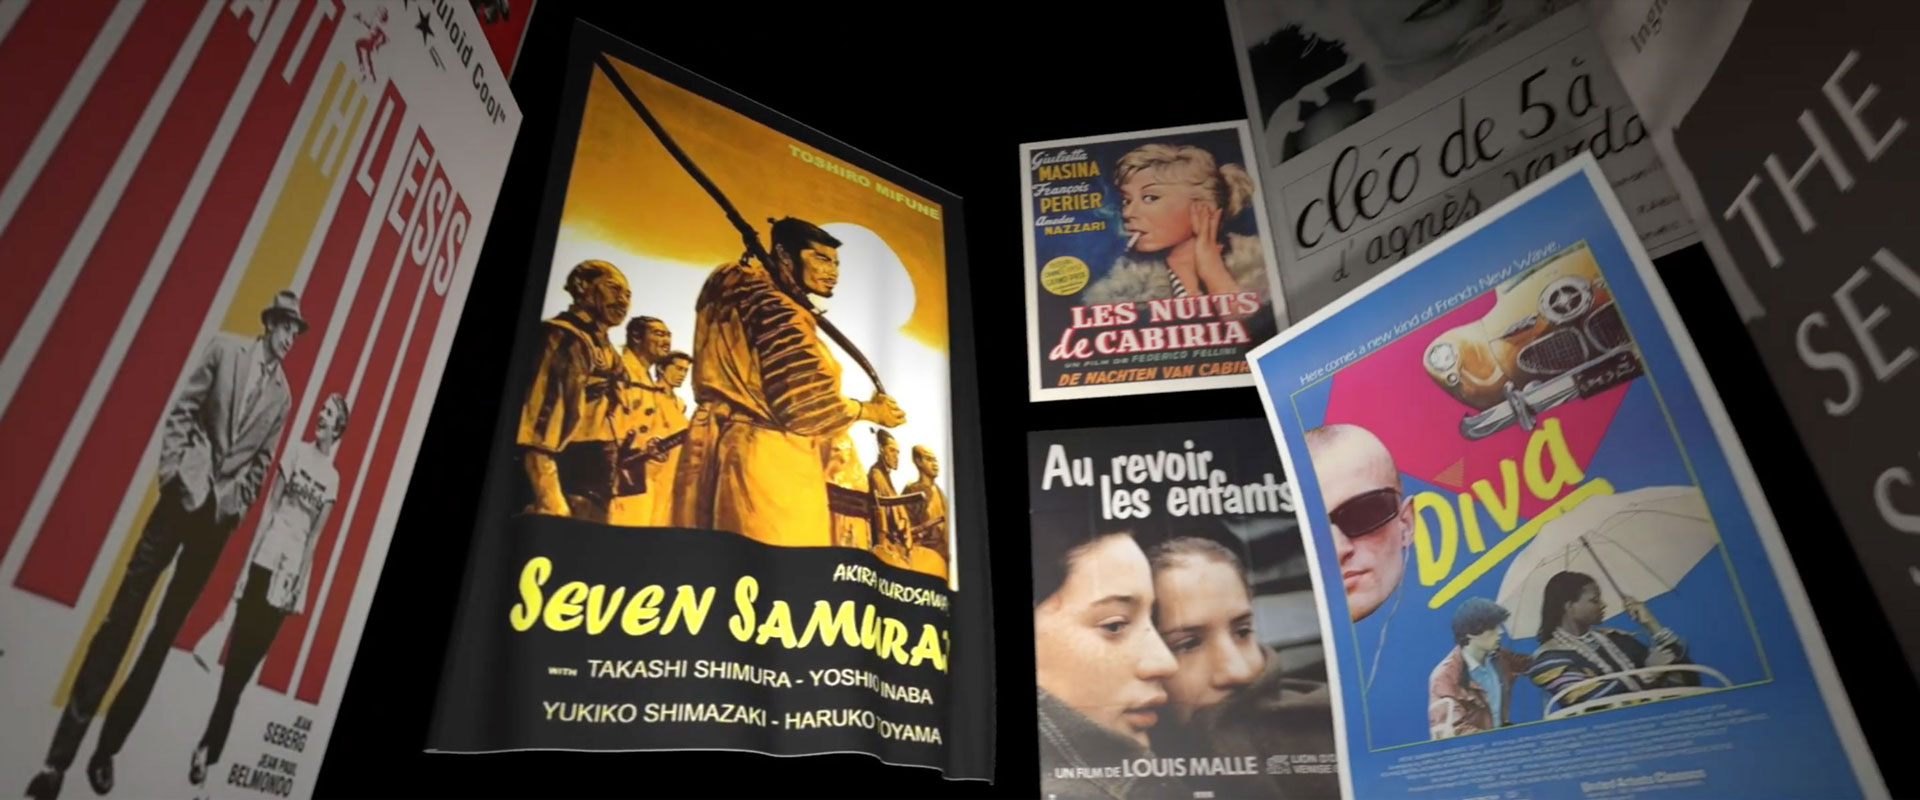 Classic film lobby cards for BREATHLESS, THE SEVENTH SAMURAI, DEVO and others